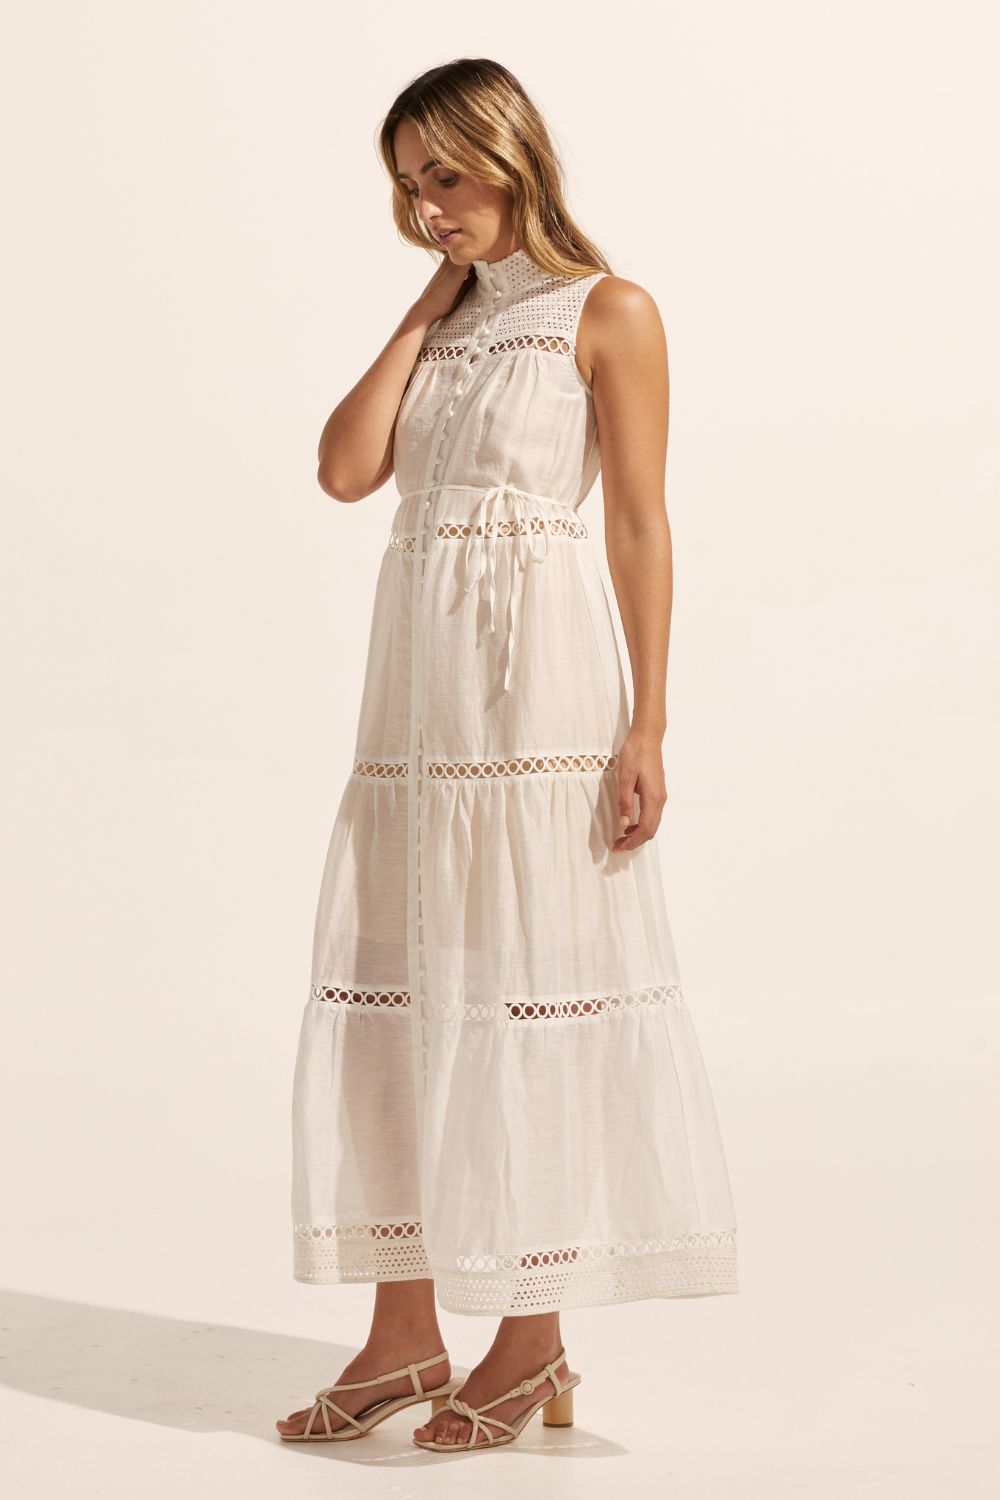 white, maxi dress, sleeveless, button down centre, high neck, circular lace design, self tie fabric belt, side image